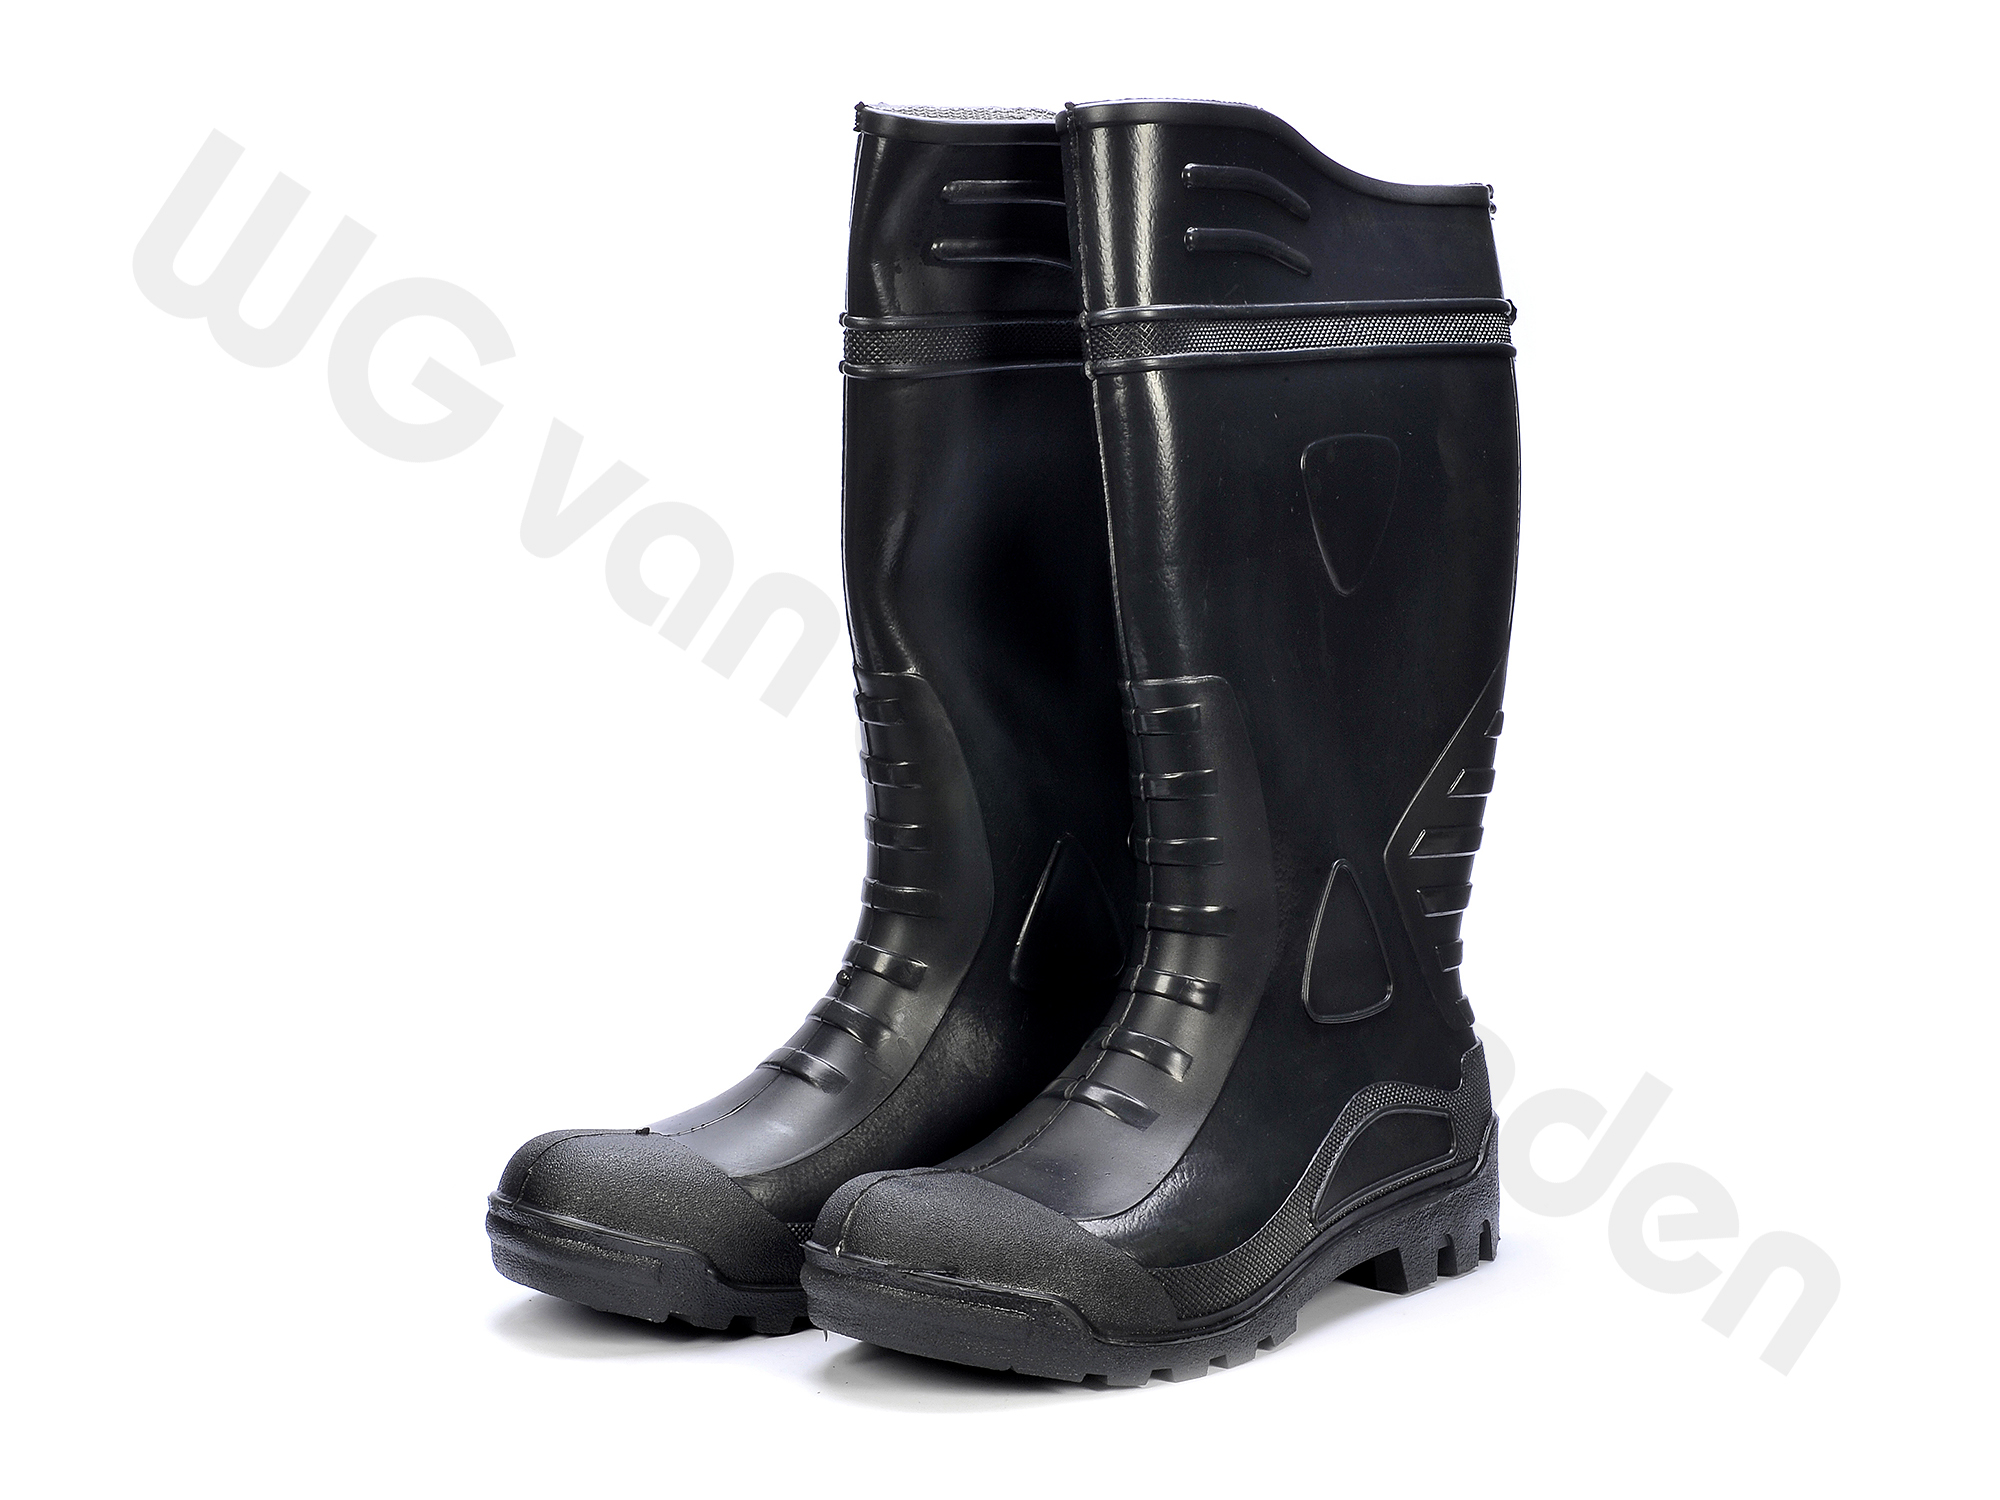 880204 BOOTS SAFETY S4 PVC WITH STEEL TOE SIZE 41/26.5CM CE